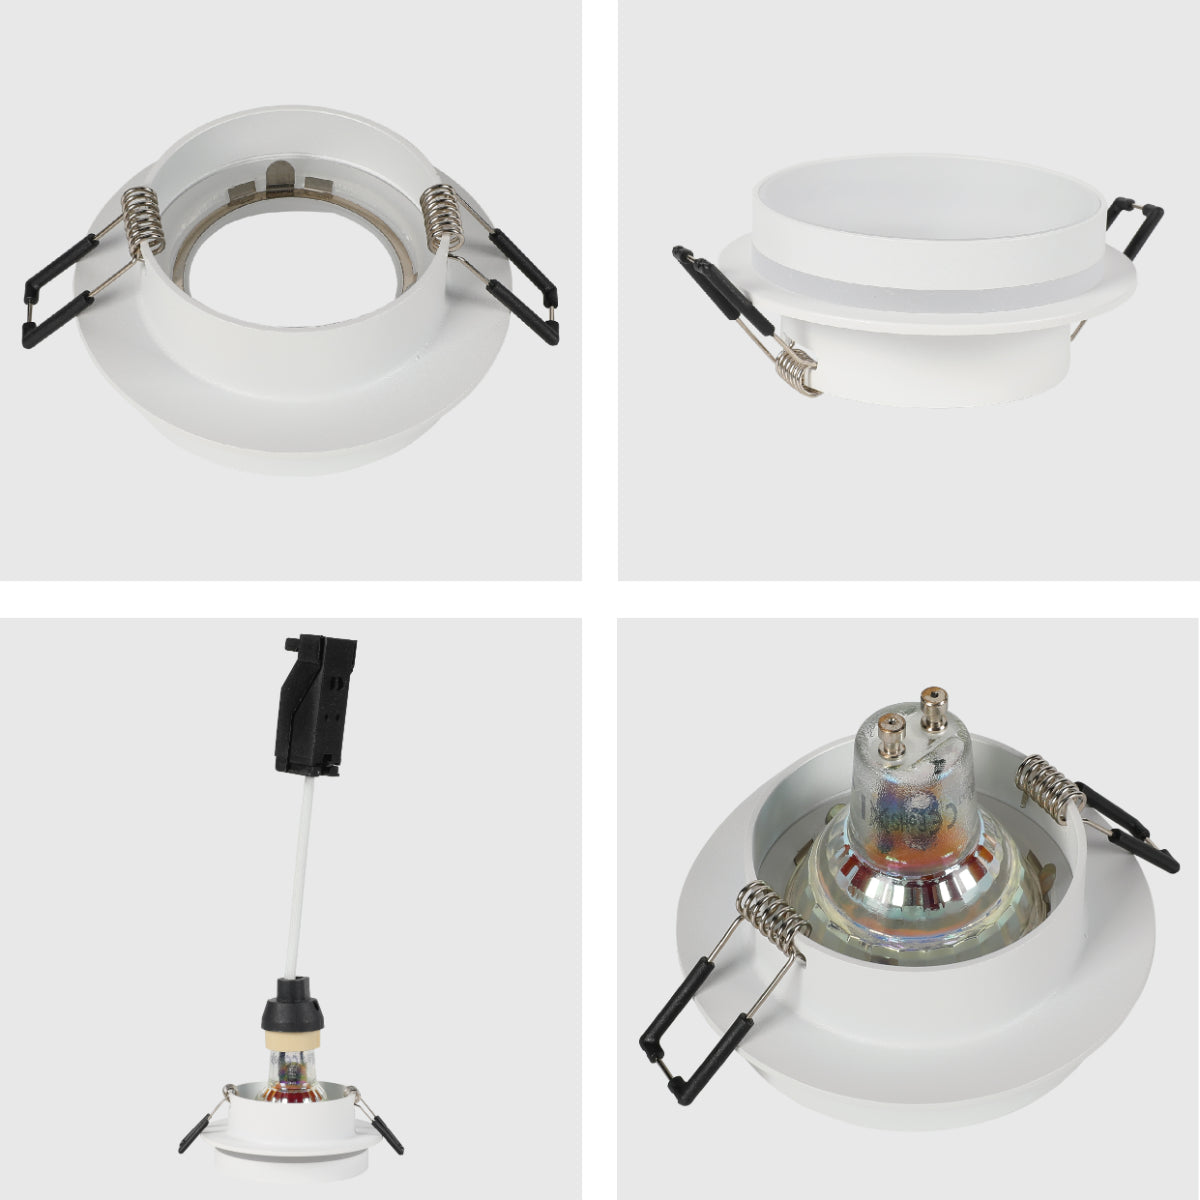 Close shots of GU10 Recessed Aluminium Downlight - Dual-Tone Acrylic with Color Matched Trim 143-04043